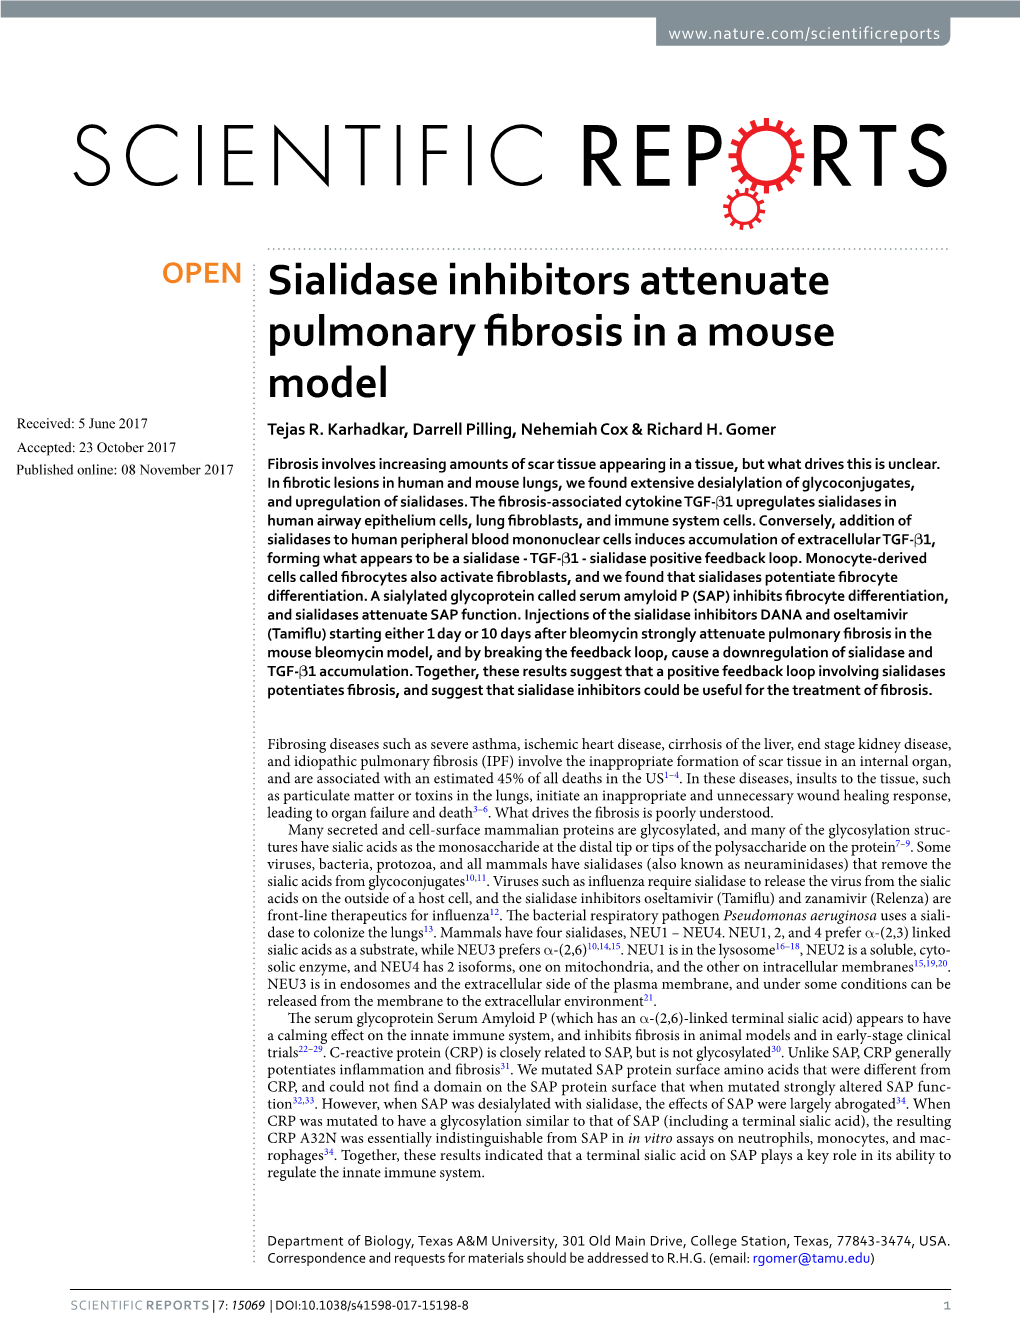 Sialidase Inhibitors Attenuate Pulmonary Fibrosis in a Mouse Model